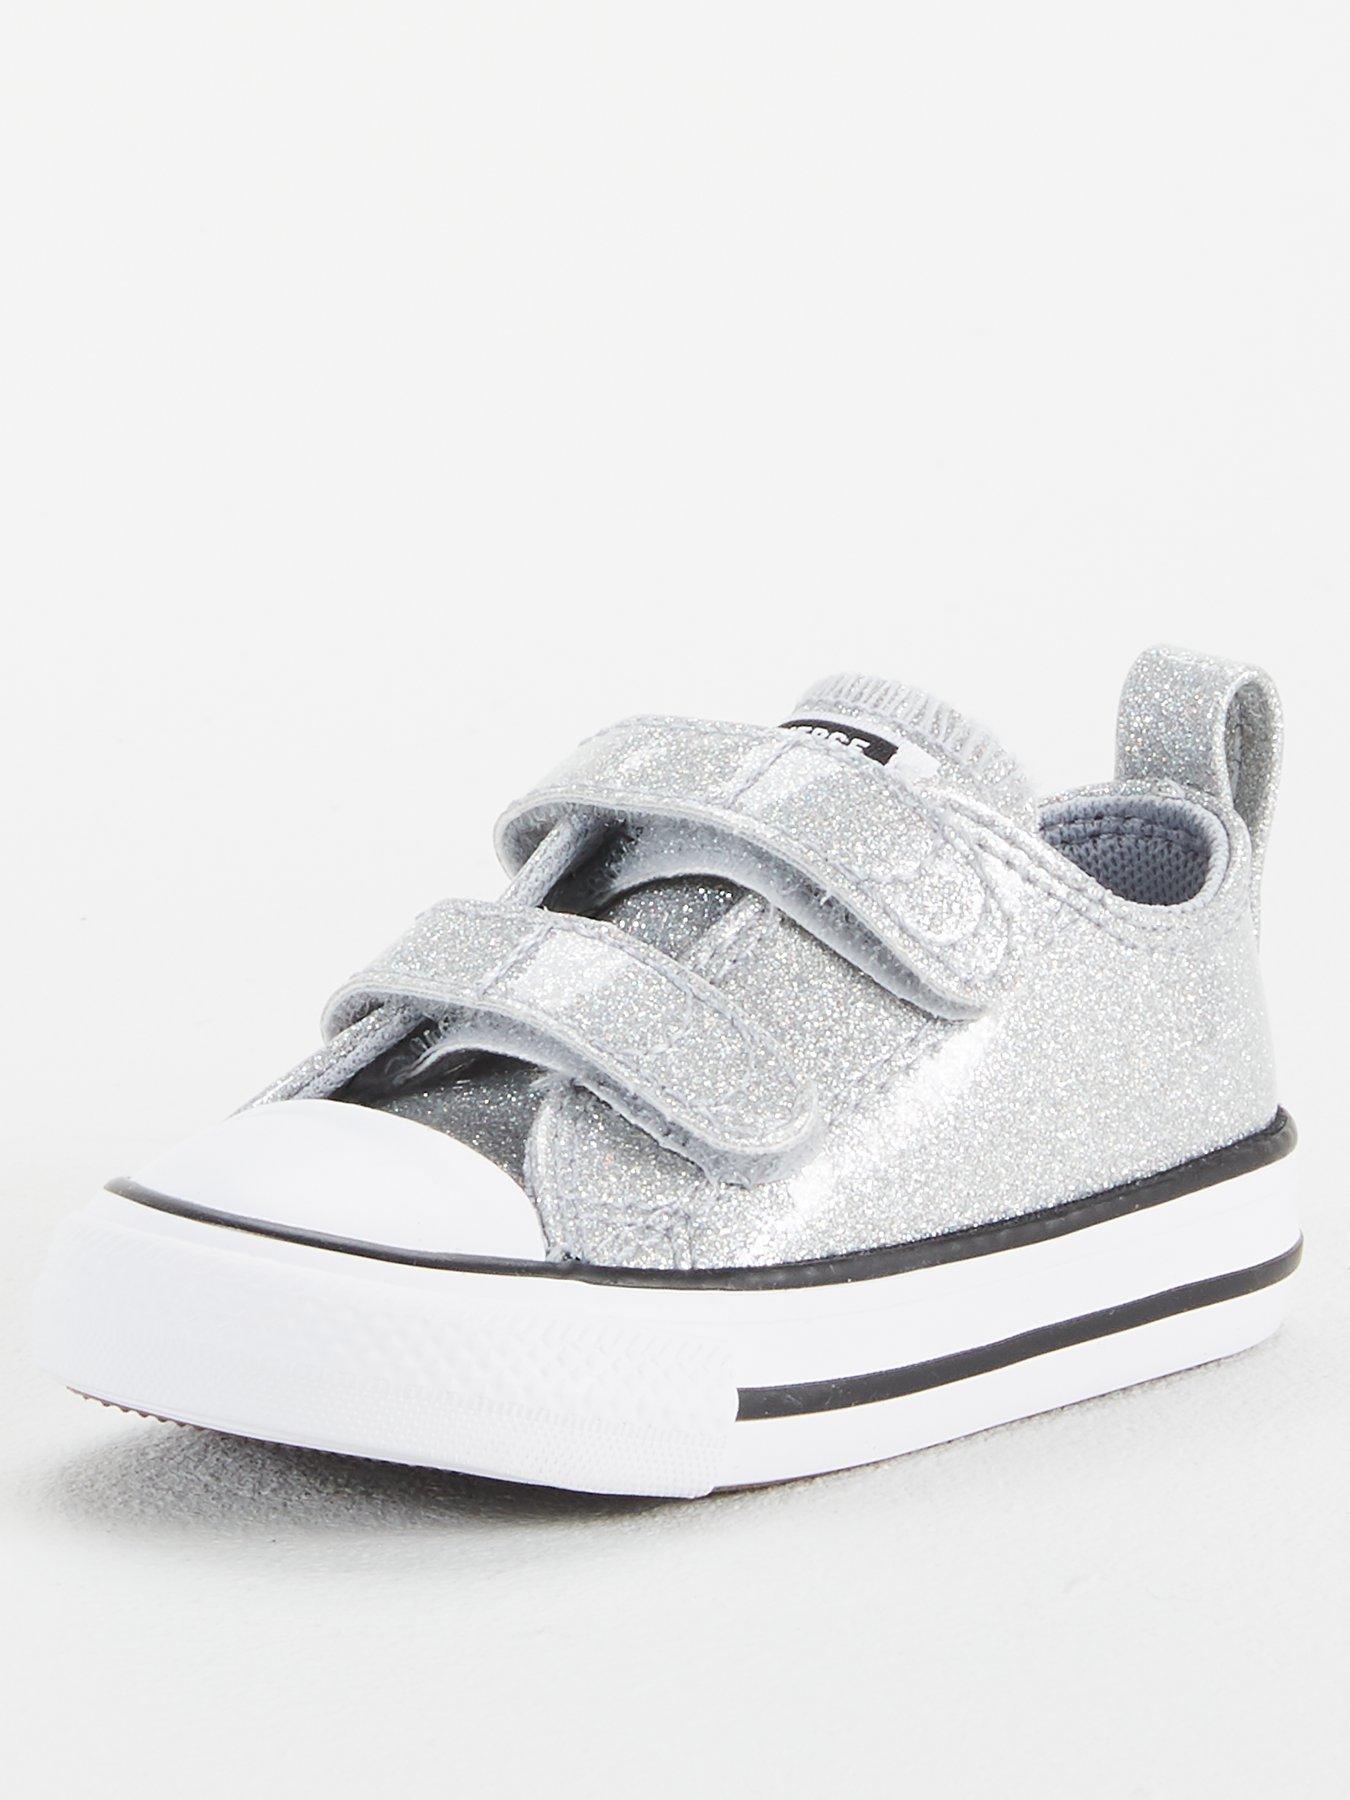 converse all star oxford sparkle infant